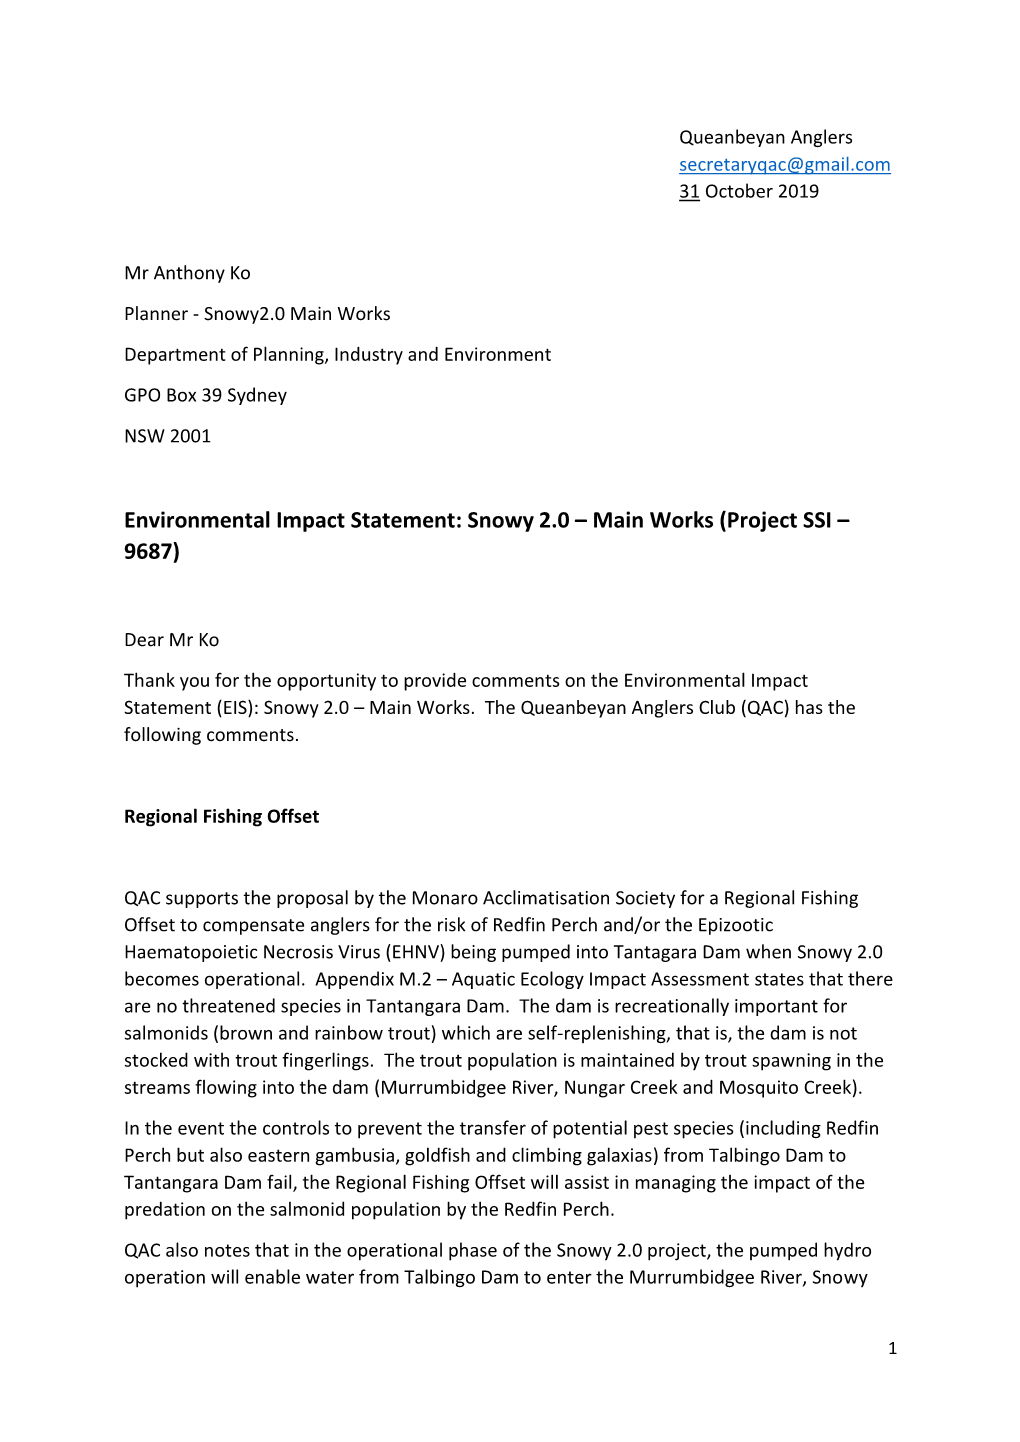 Environmental Impact Statement: Snowy 2.0 – Main Works (Project SSI – 9687)